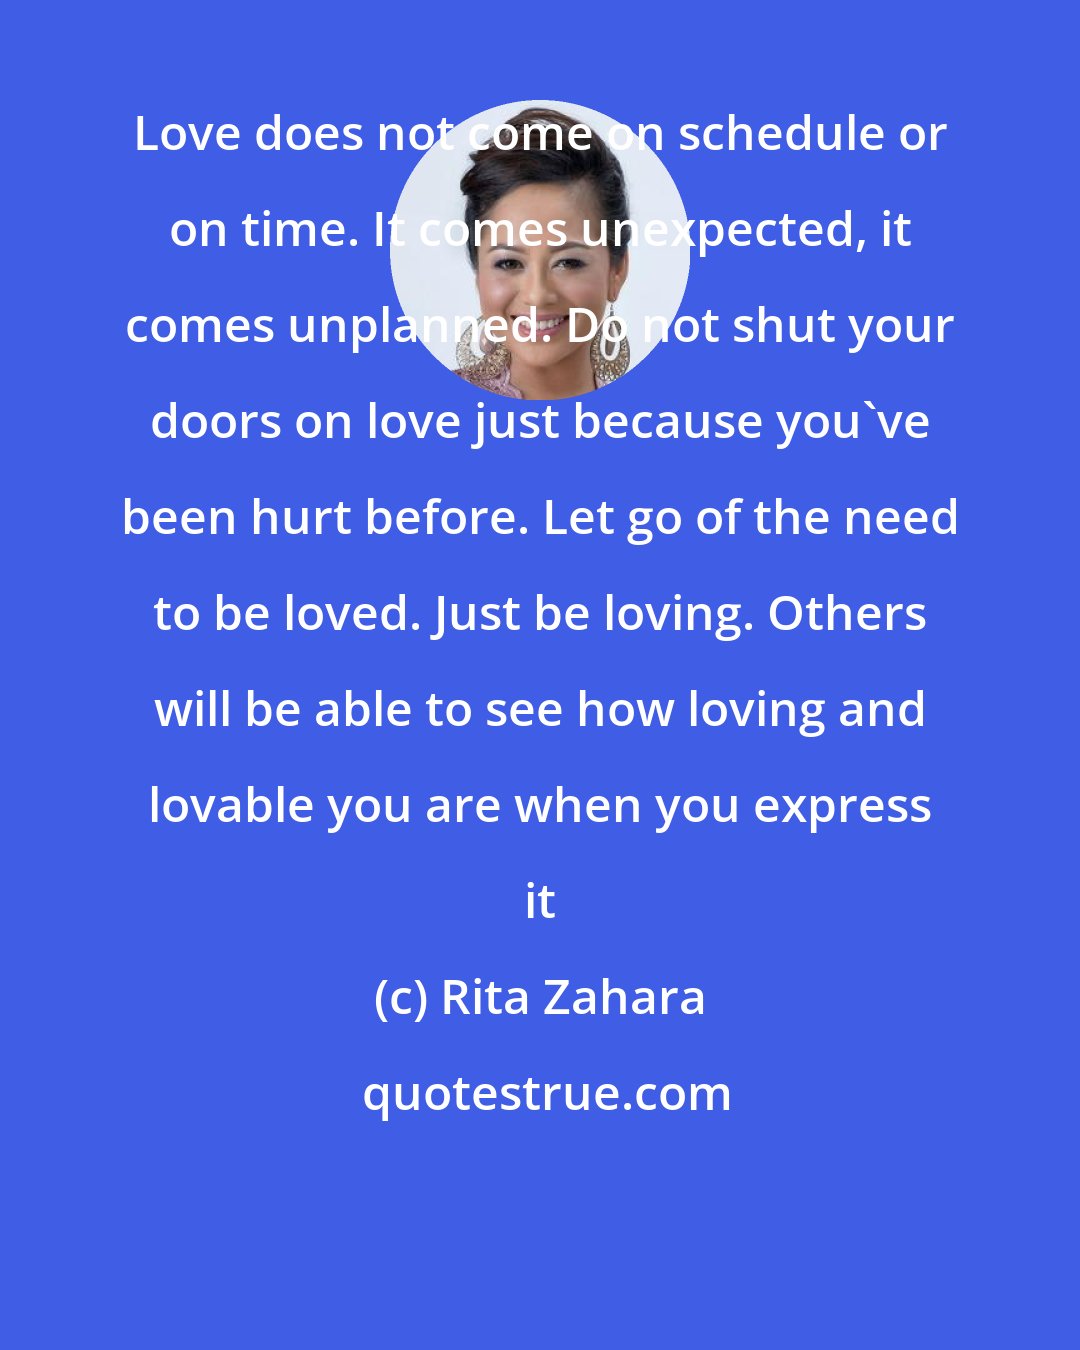 Rita Zahara: Love does not come on schedule or on time. It comes unexpected, it comes unplanned. Do not shut your doors on love just because you've been hurt before. Let go of the need to be loved. Just be loving. Others will be able to see how loving and lovable you are when you express it